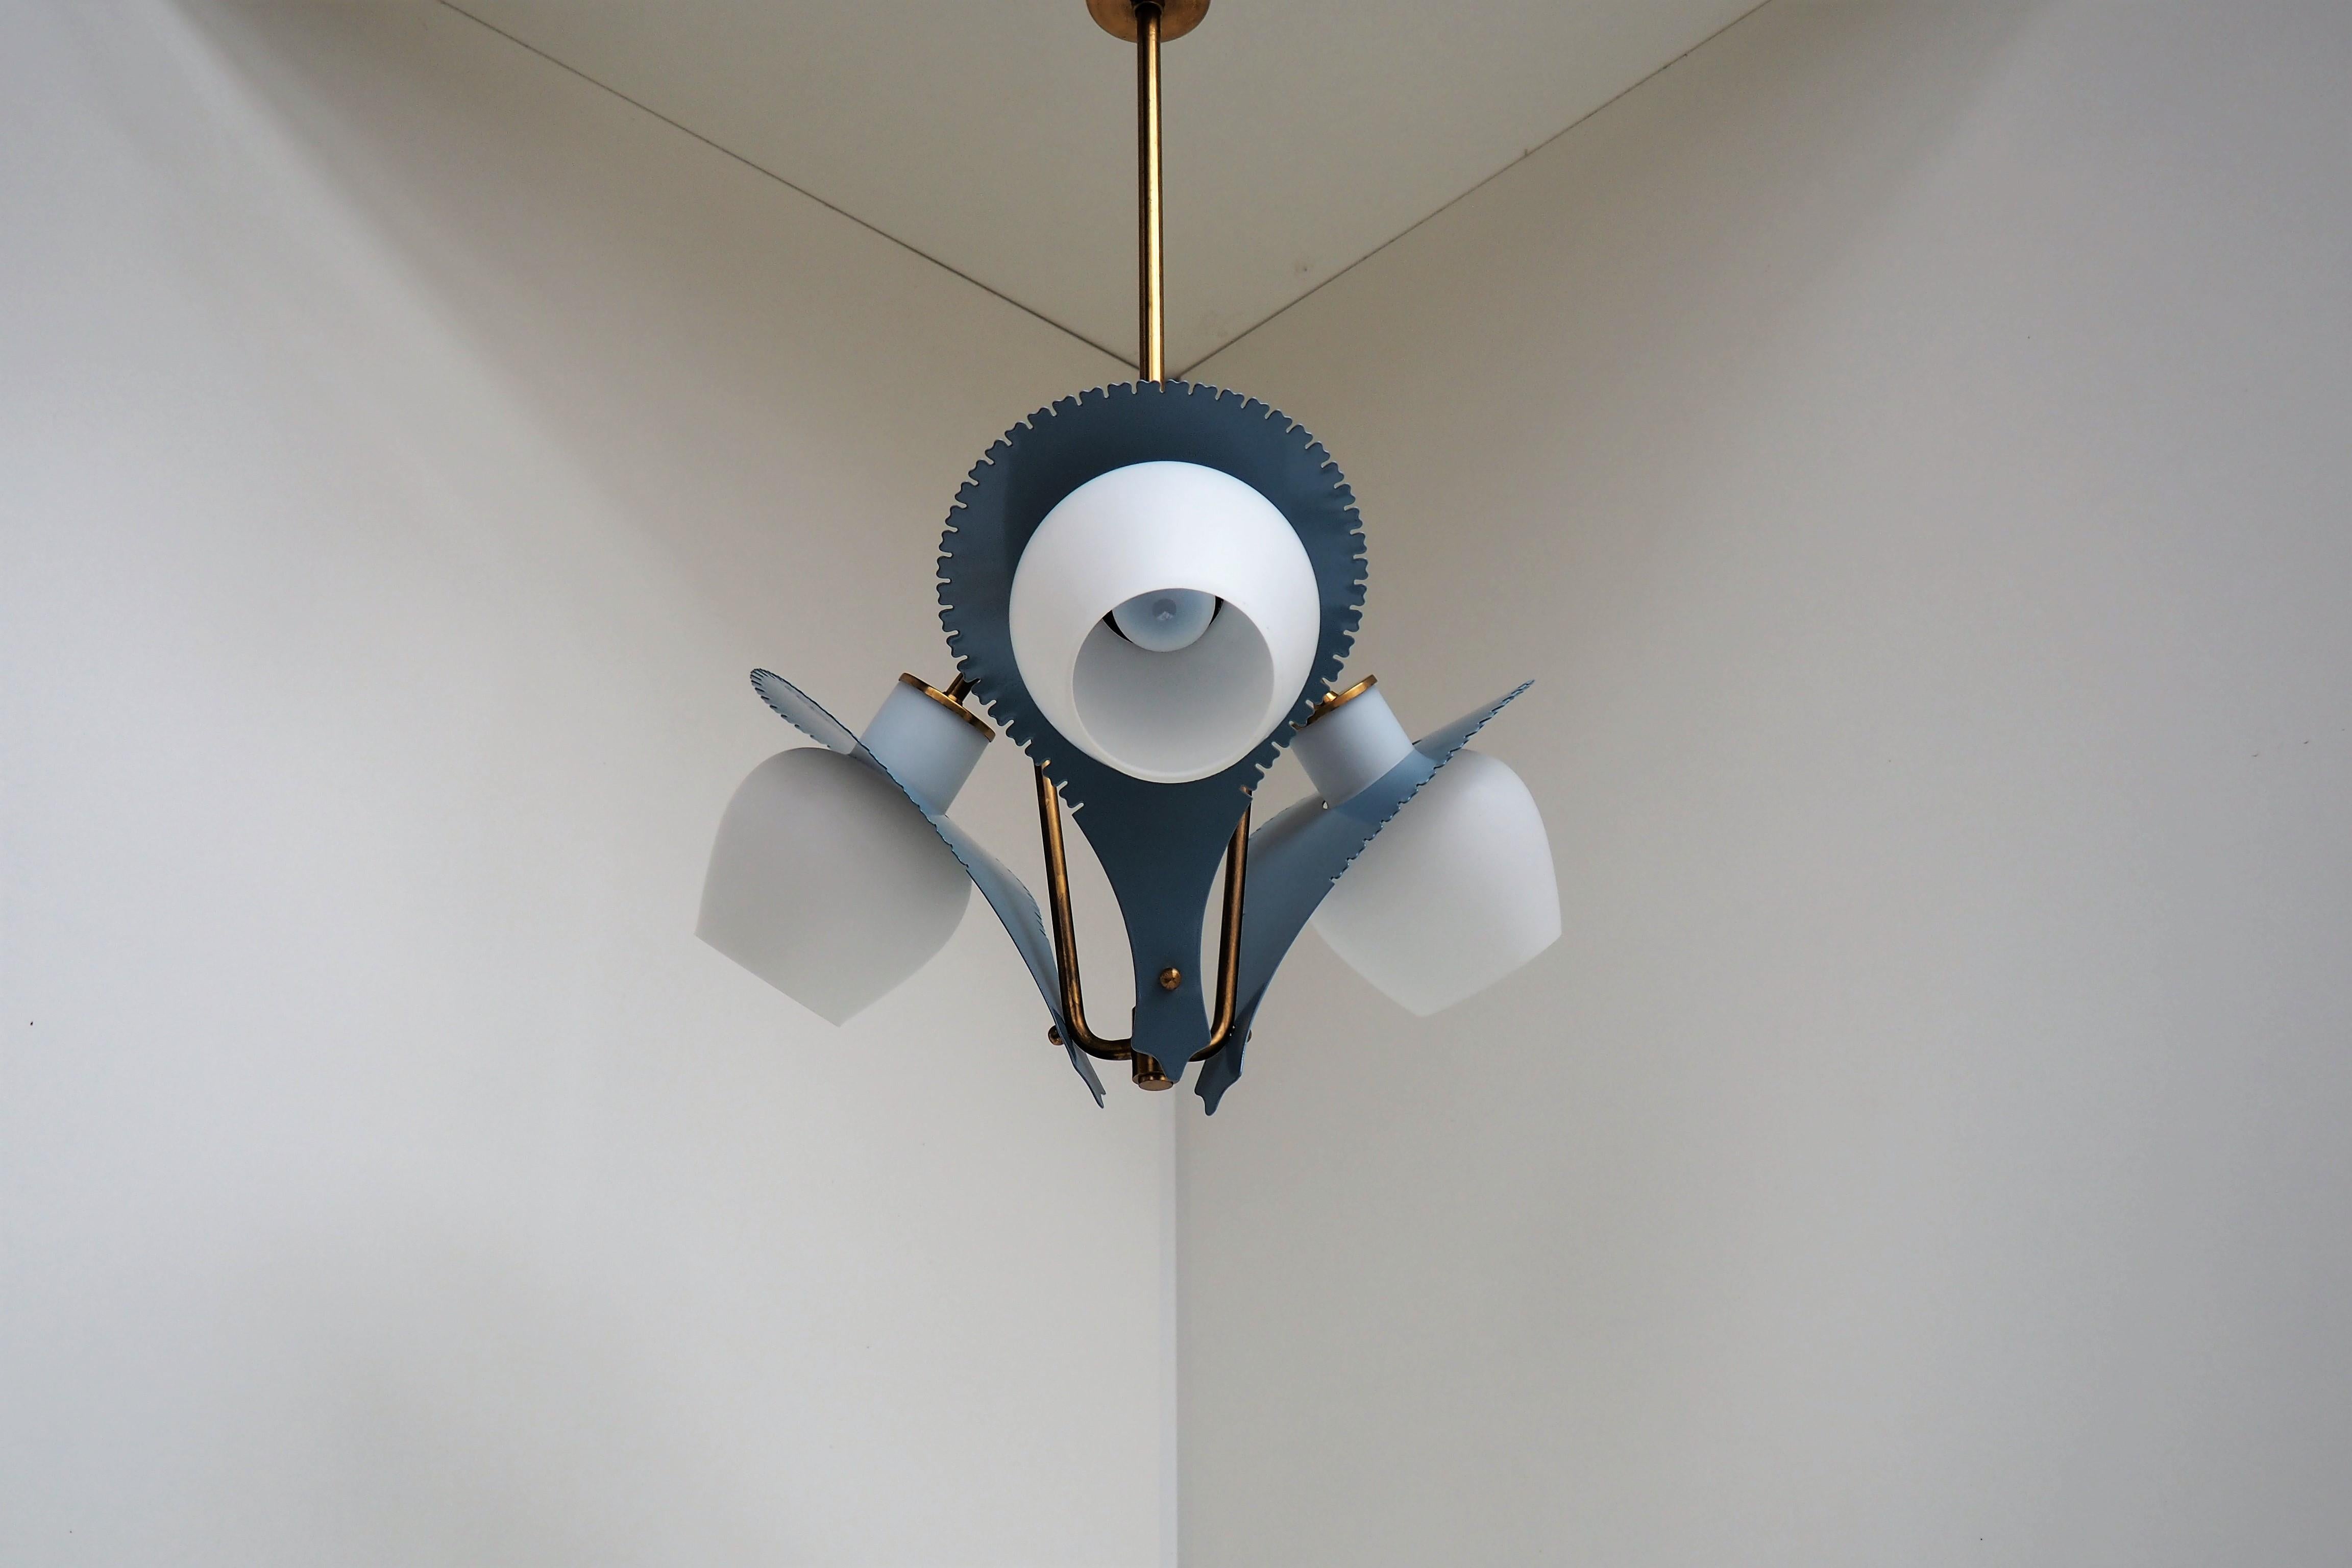 Painted Stilnovo Chandelier by Bent Karlby for Lyfa, Danish Design from the 1950s For Sale